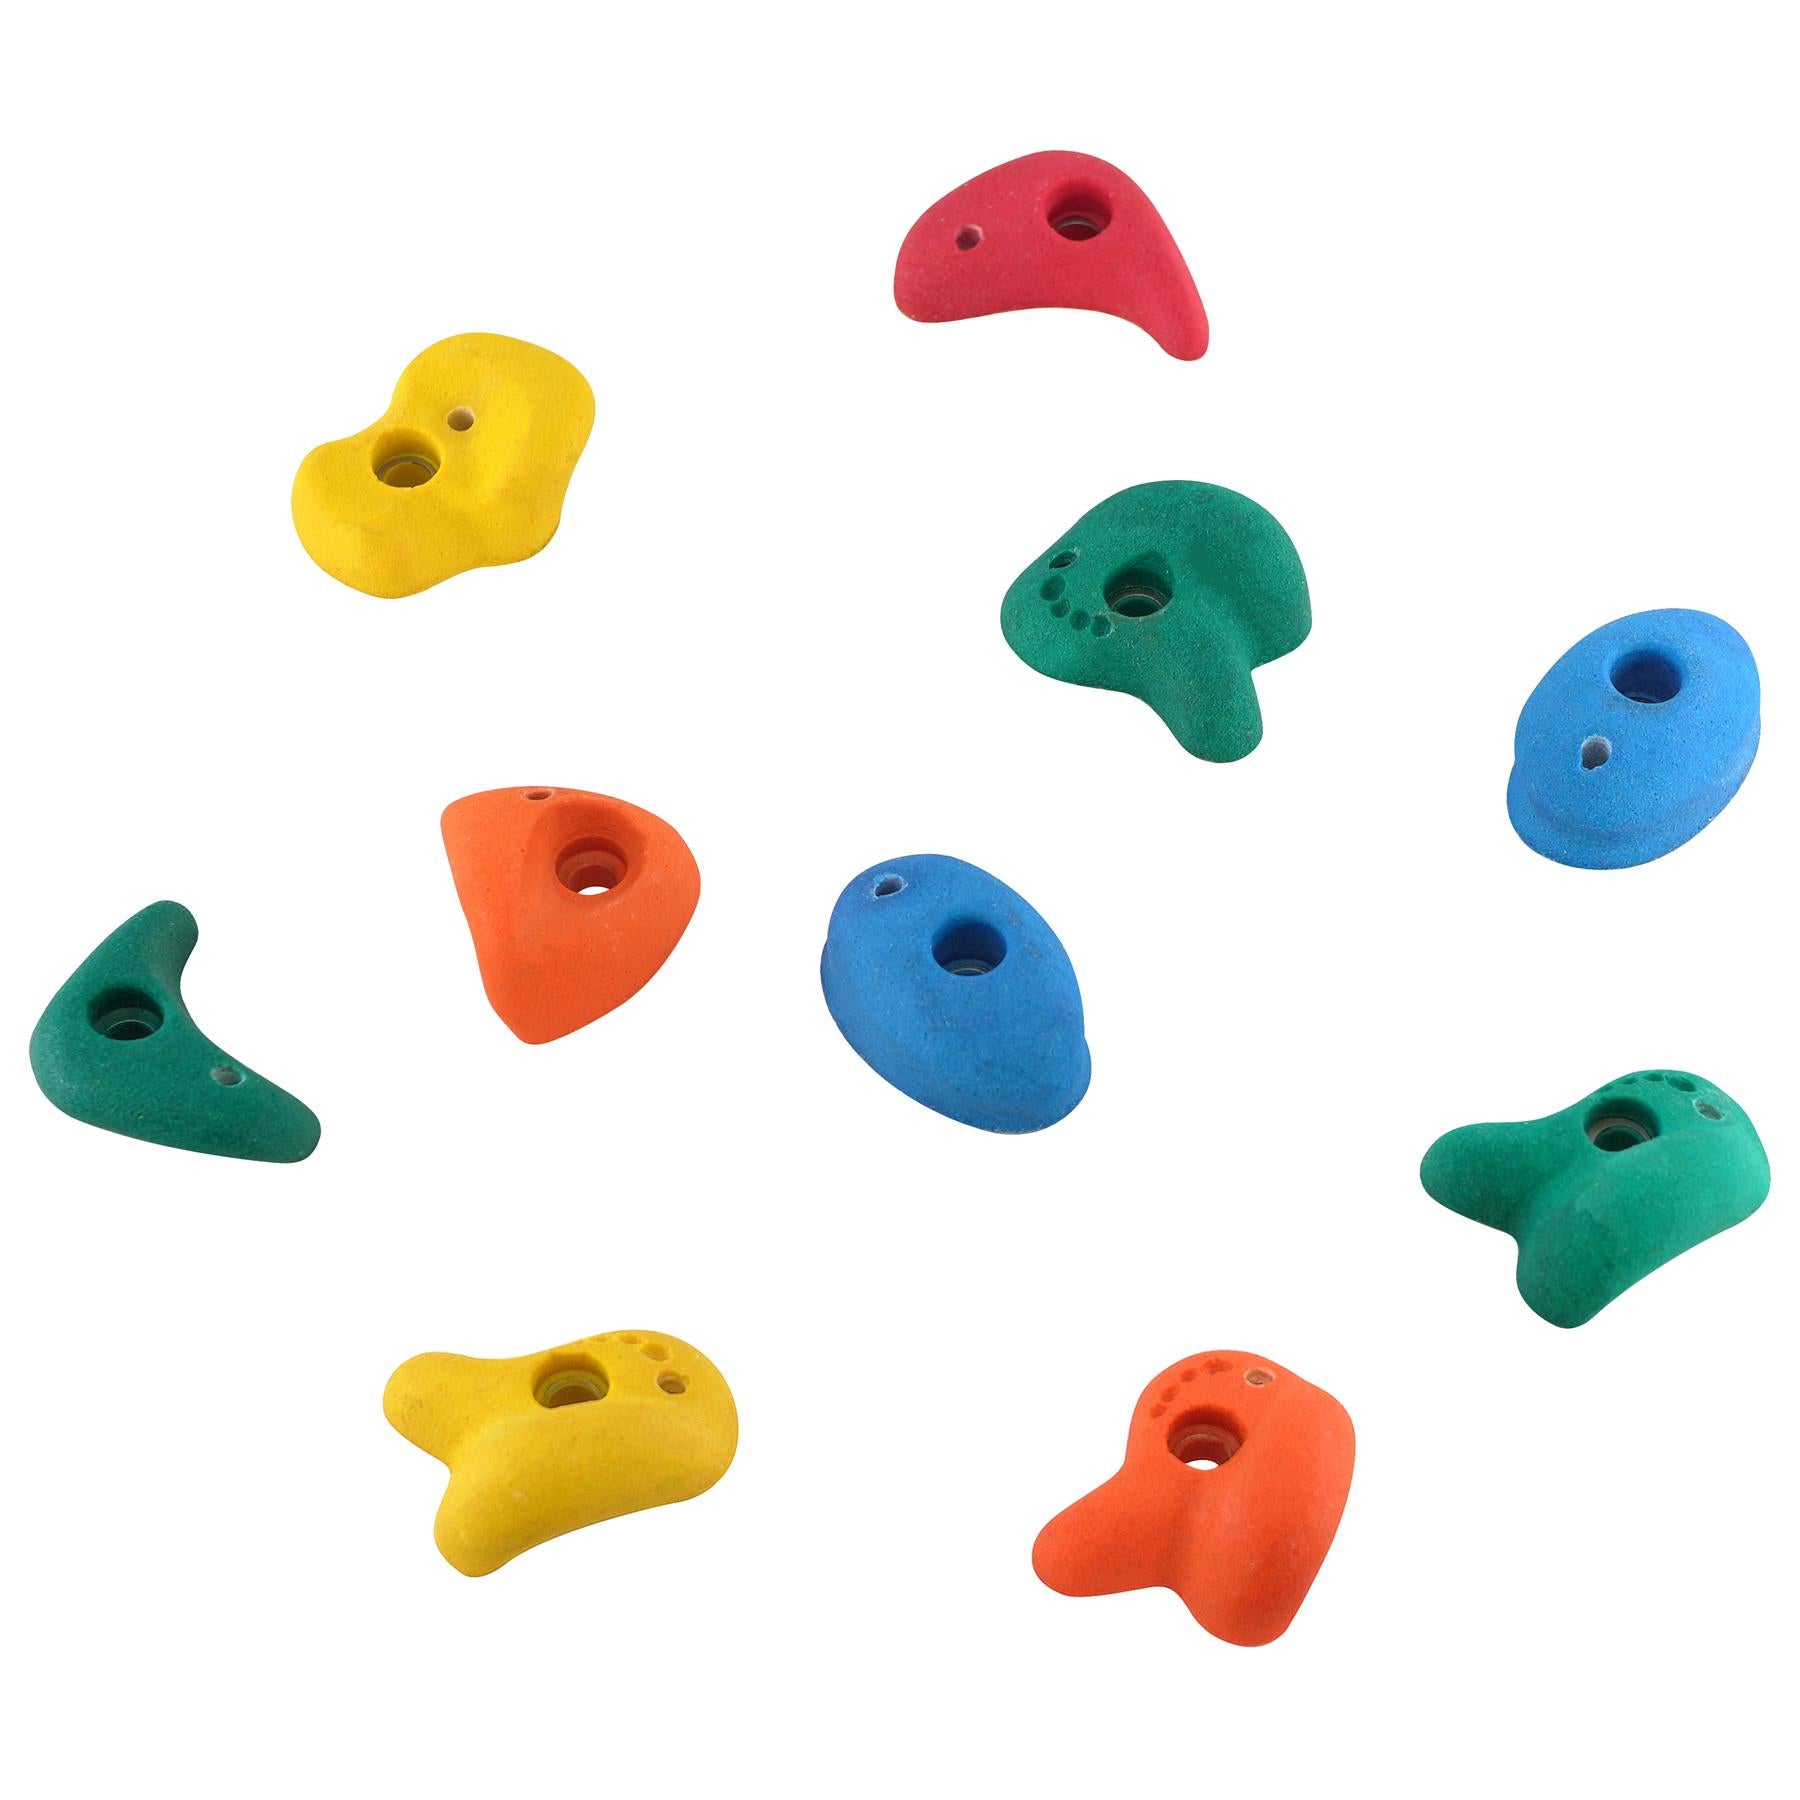 Climbing Stones for Climbing Wall by The Magic Toy Shop - UKBuyZone